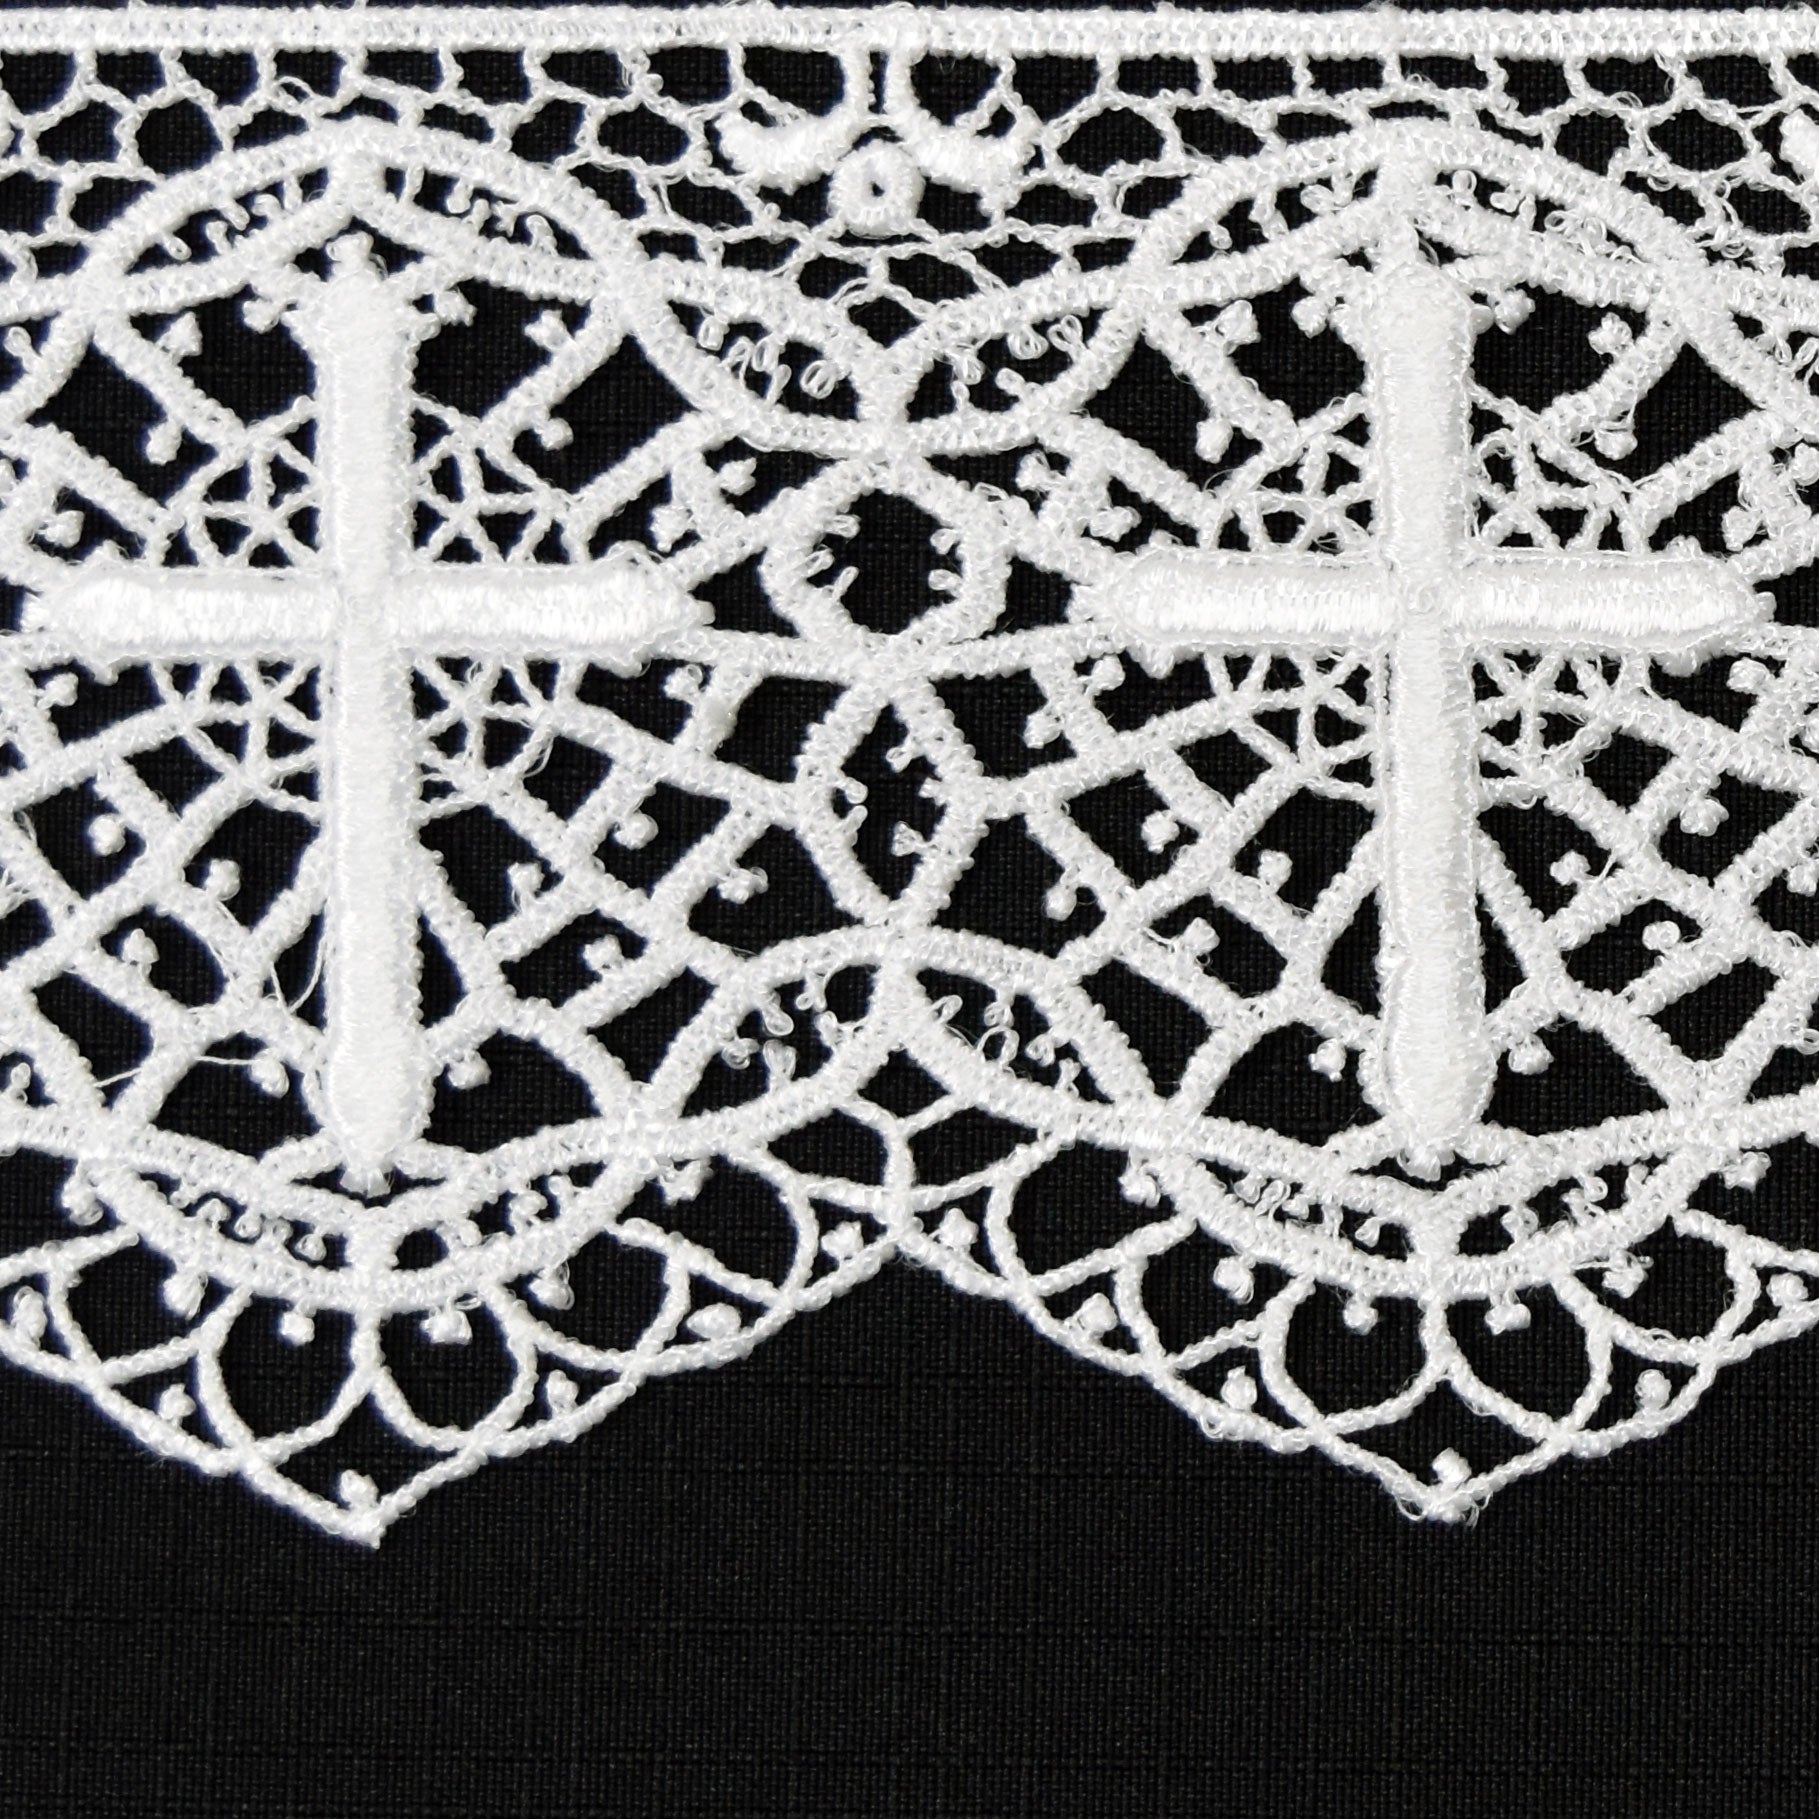 Lace with Cross Embroidery #5875